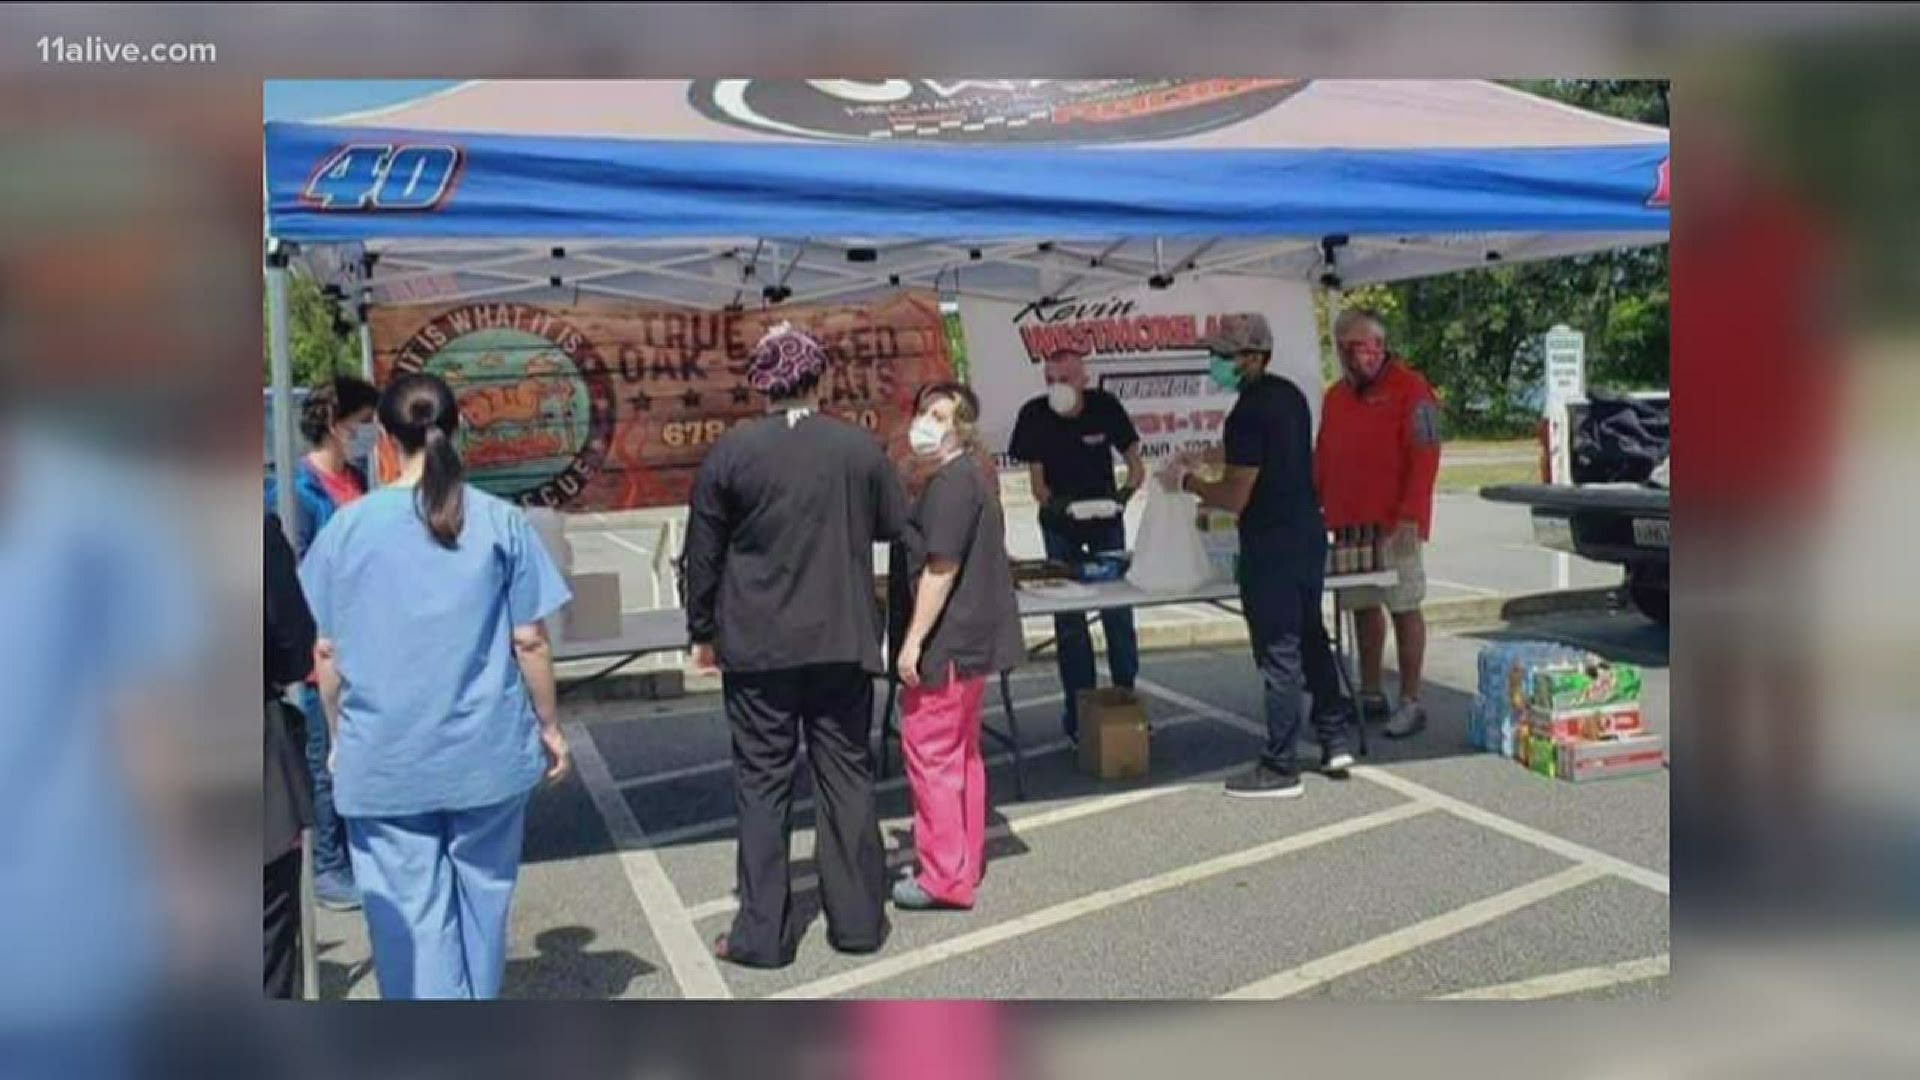 They said they wanted to show their appreciation to healthcare workers.